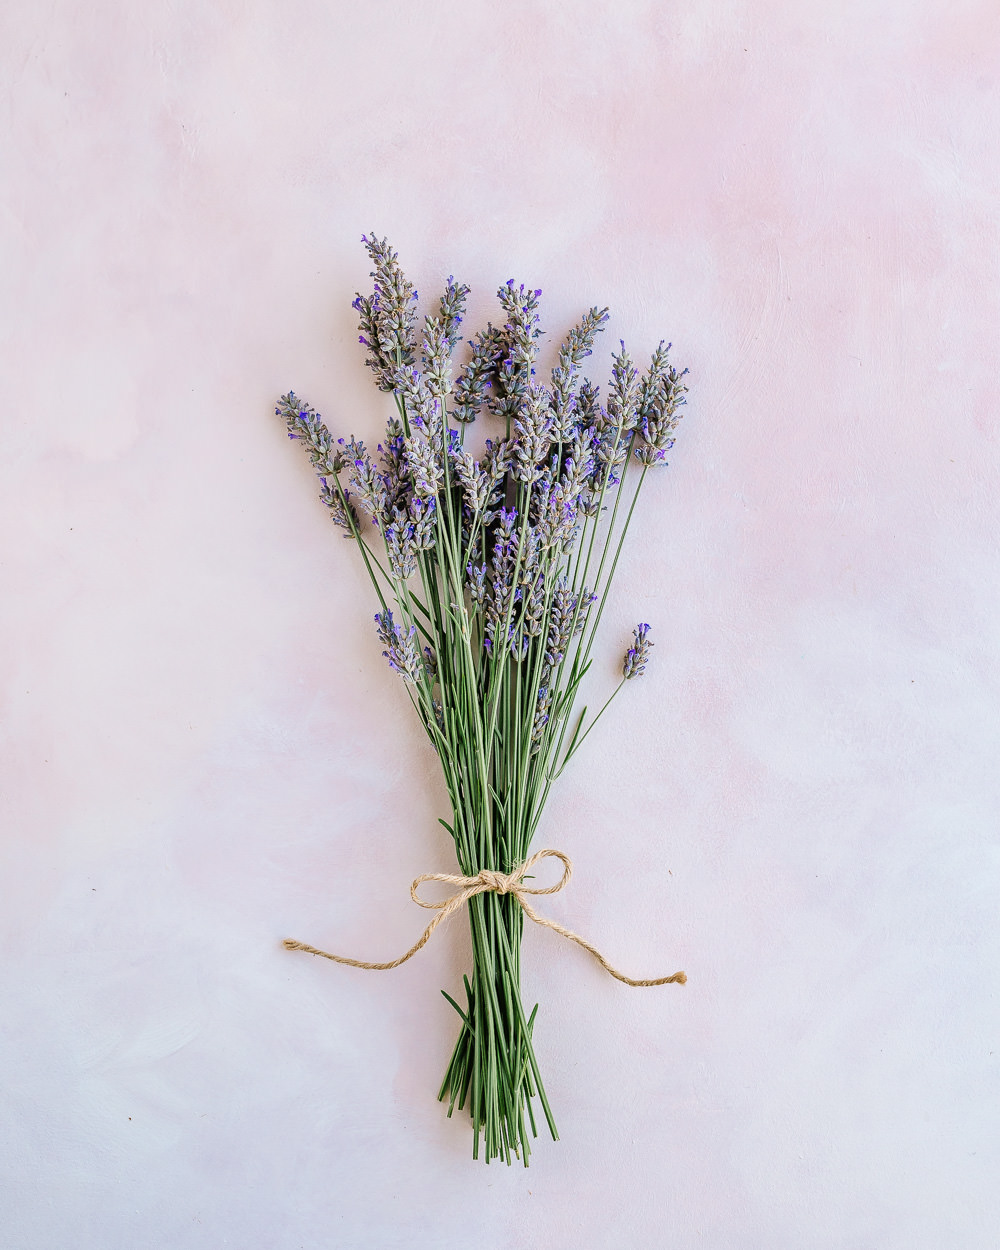 How to Dry Lavender for DIY Projects